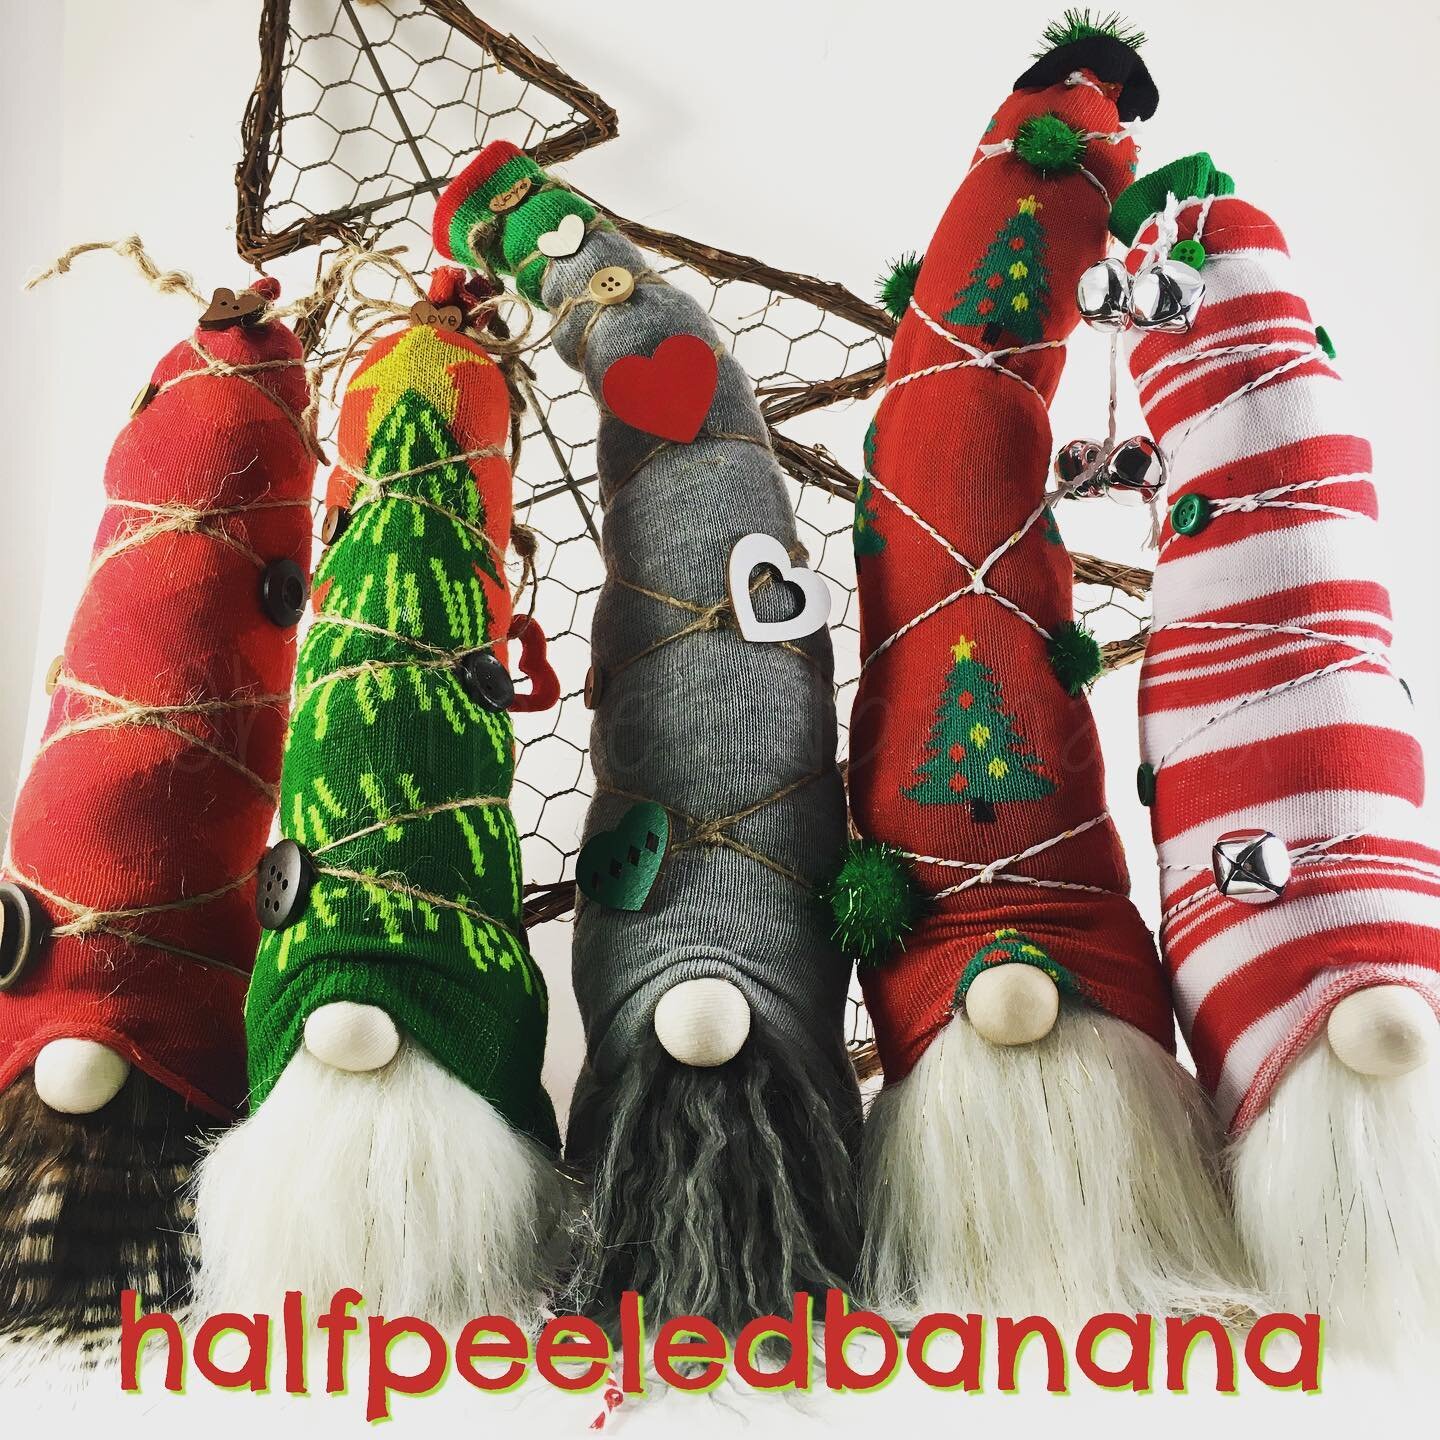 Merry Christmas from Ann at #halfpeeledbanana ❣️🎄❣️ Thank you to all of you who have supported my little business this year❣️ ✌️❤️🍌